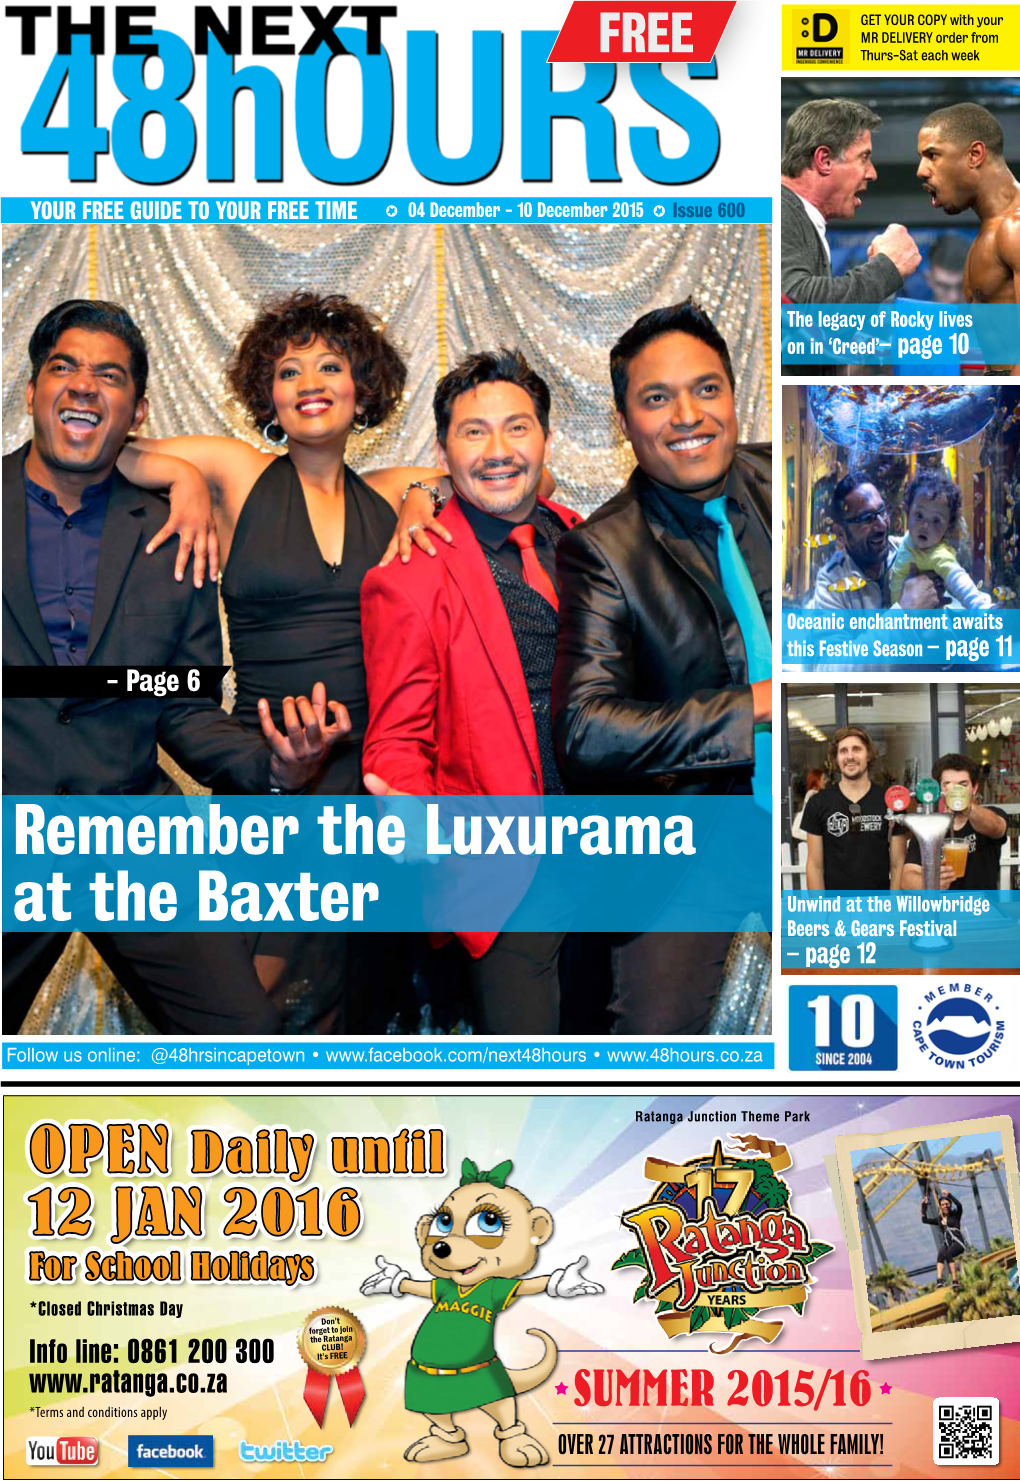 Remember the Luxurama at the Baxter 12 JAN 2016